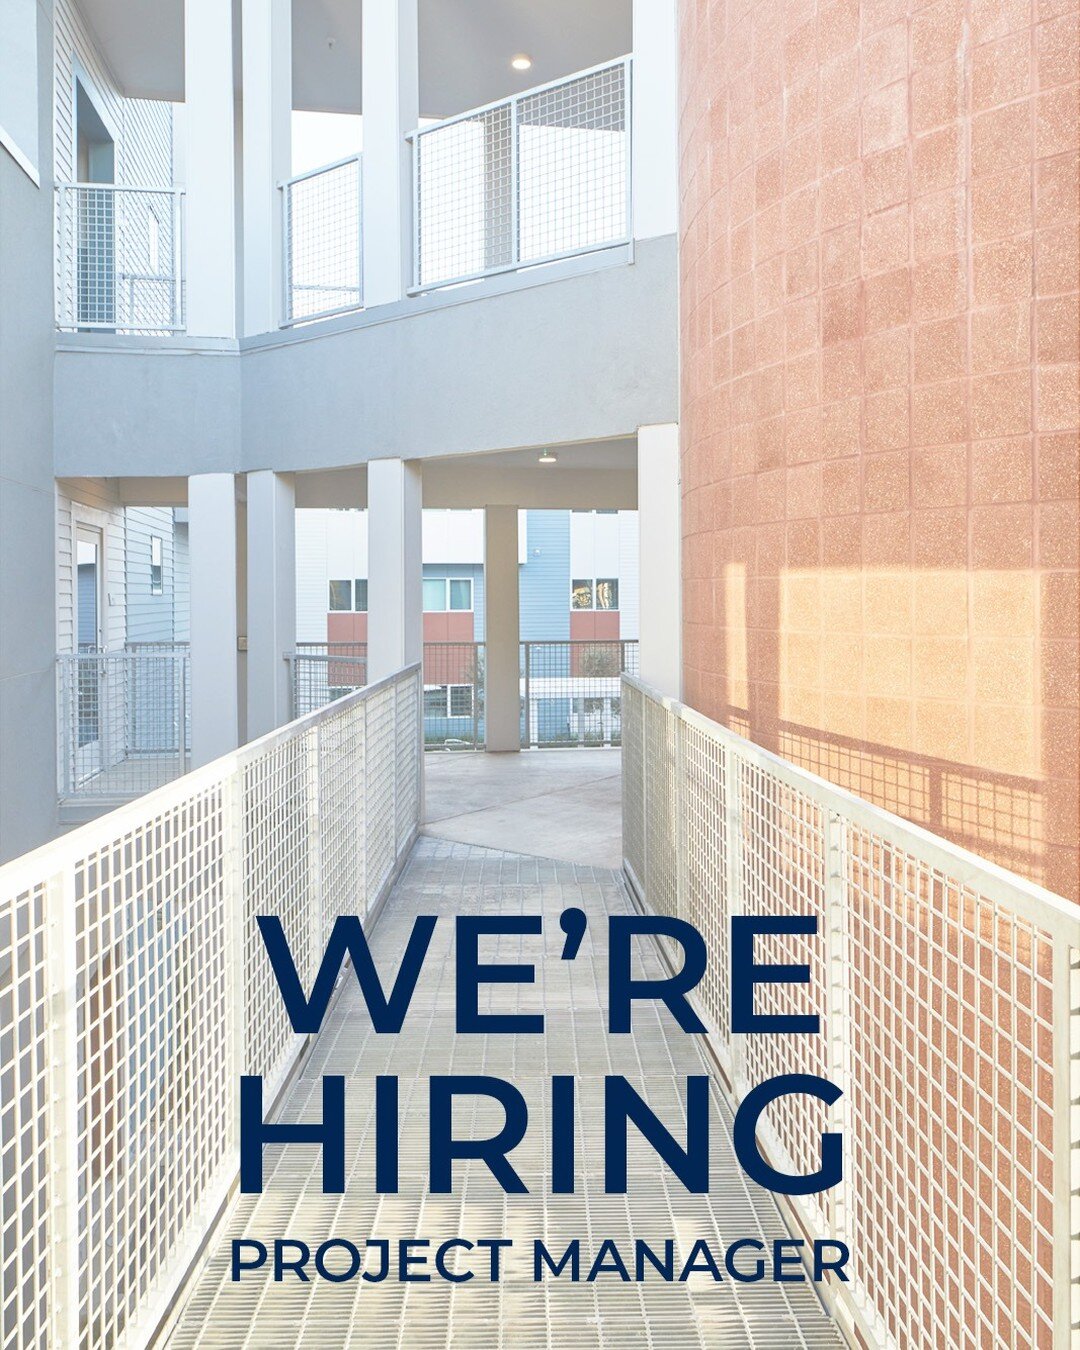 We're Hiring!

View Job Listing on the AIA Houston Job Board:
https://aiahouston.org/v/job-detail/Project-Manager/3kh/